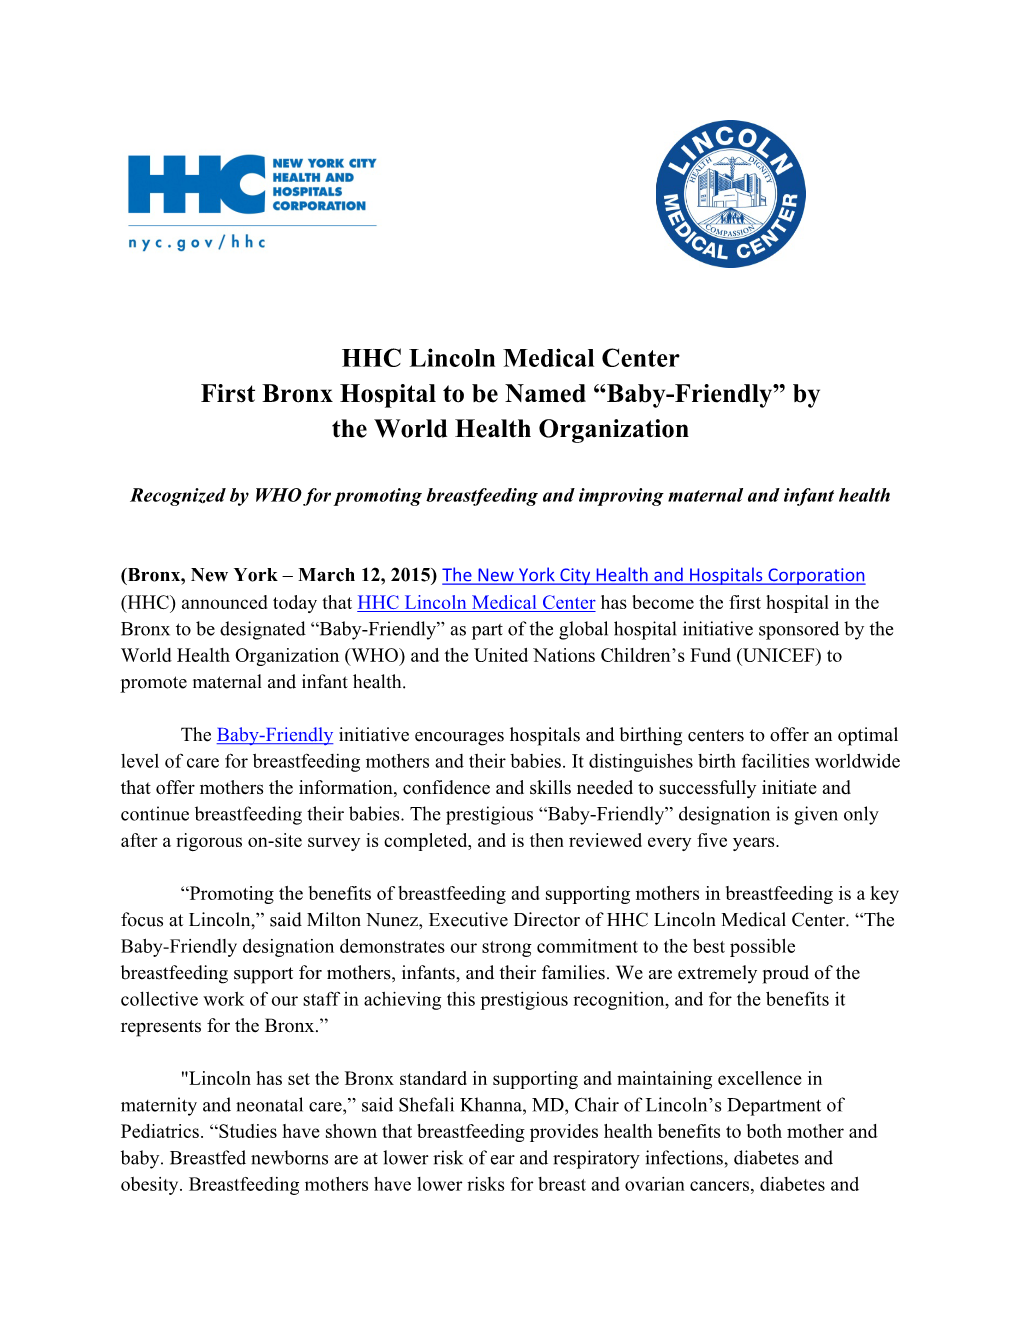 HHC Lincoln Medical Center First Bronx Hospital to Be Named “Baby-Friendly” by the World Health Organization